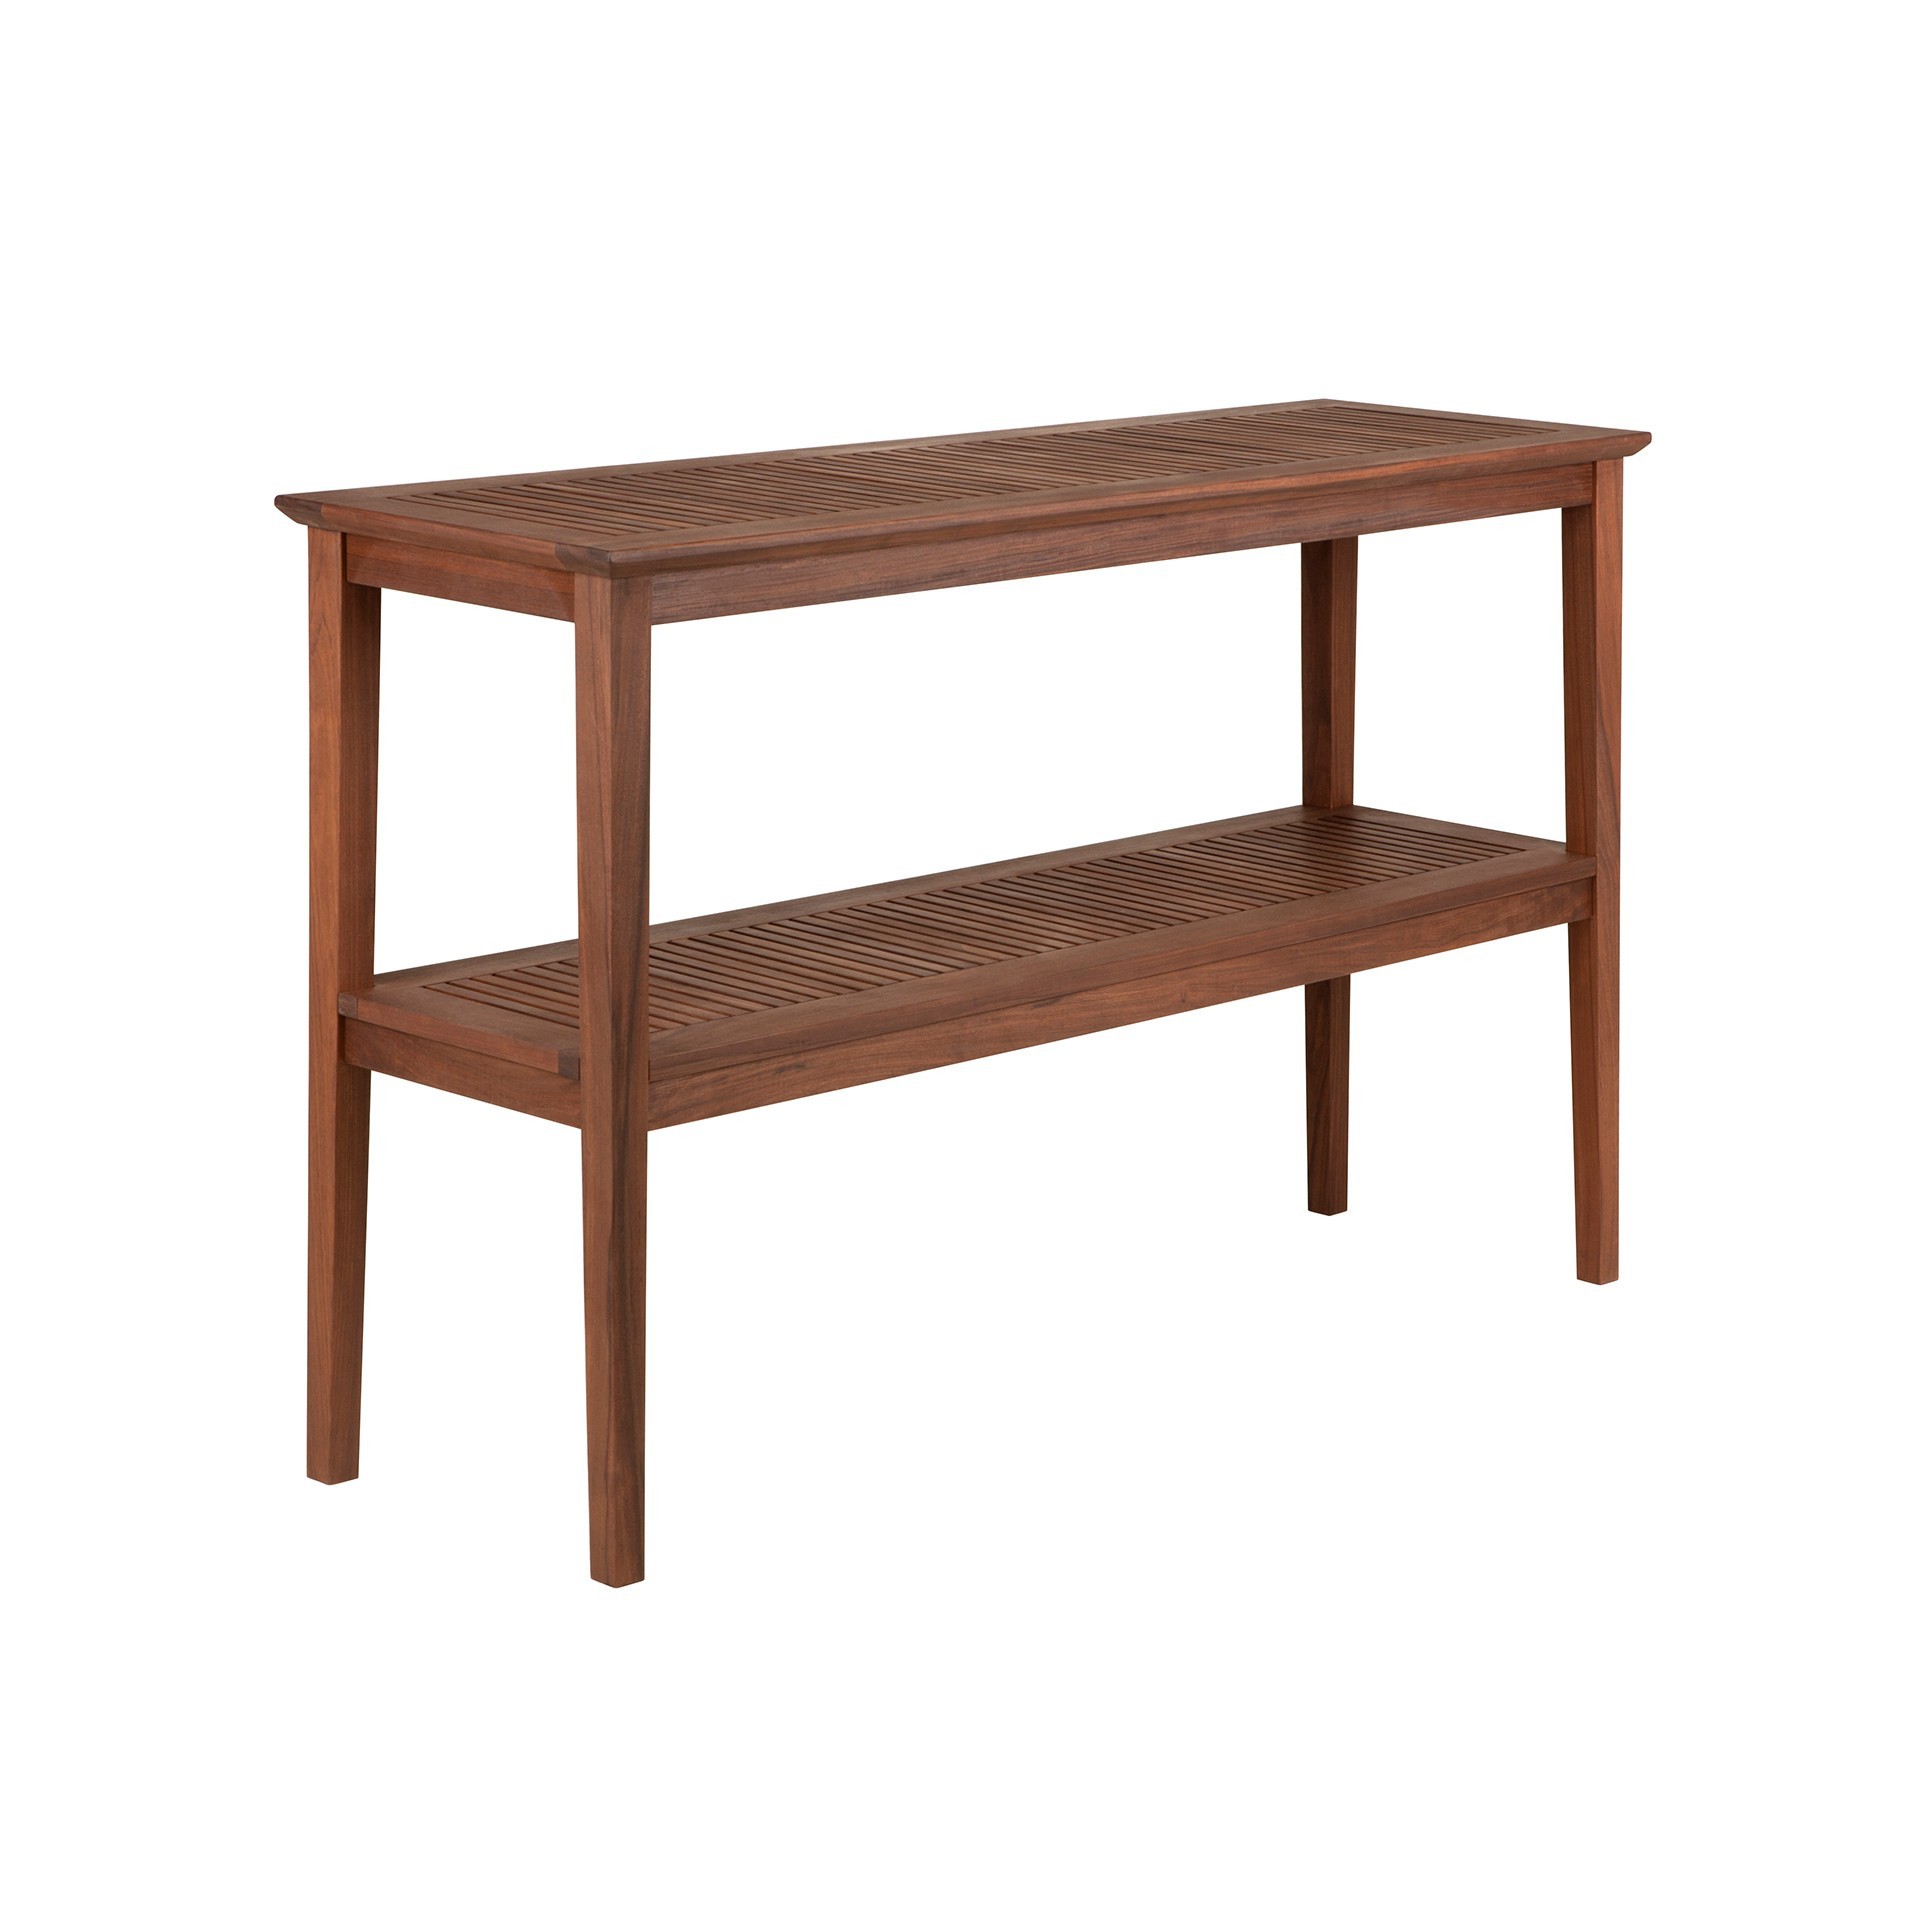 Opal console table from hausers patio luxury outdoor living by hausers patio luxury outdoor living by hausers patio